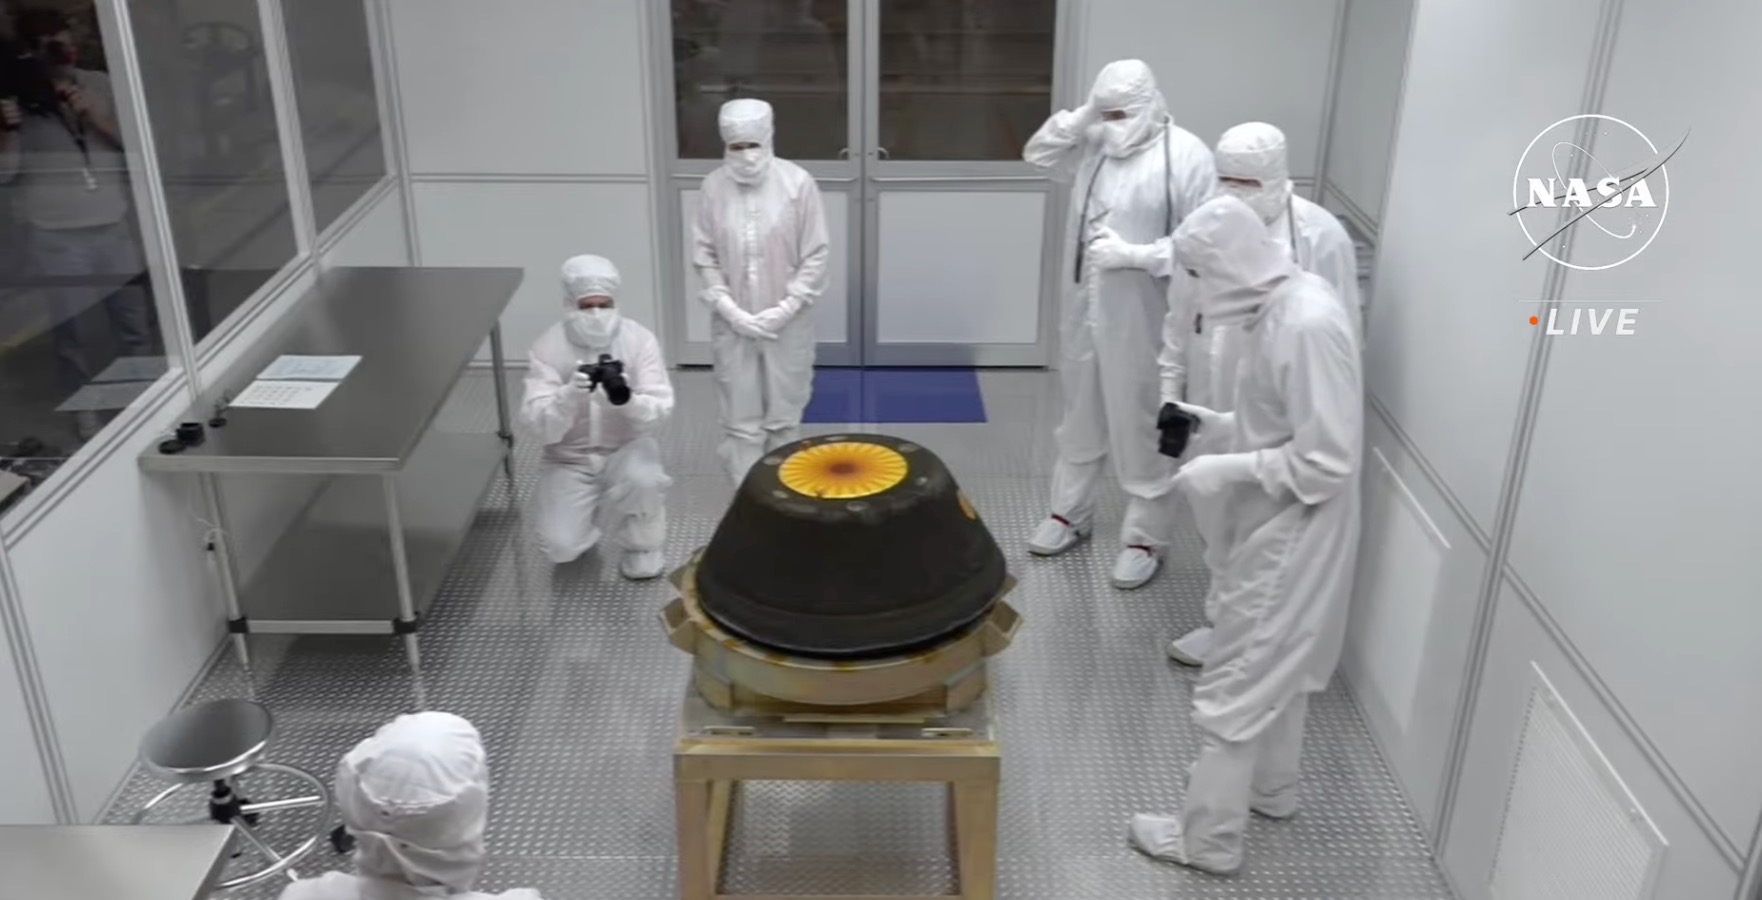 OSIRIS REx capsule in the clean room at Utah Test and Training Range. It is surrounded by 6 people in white coveralls.